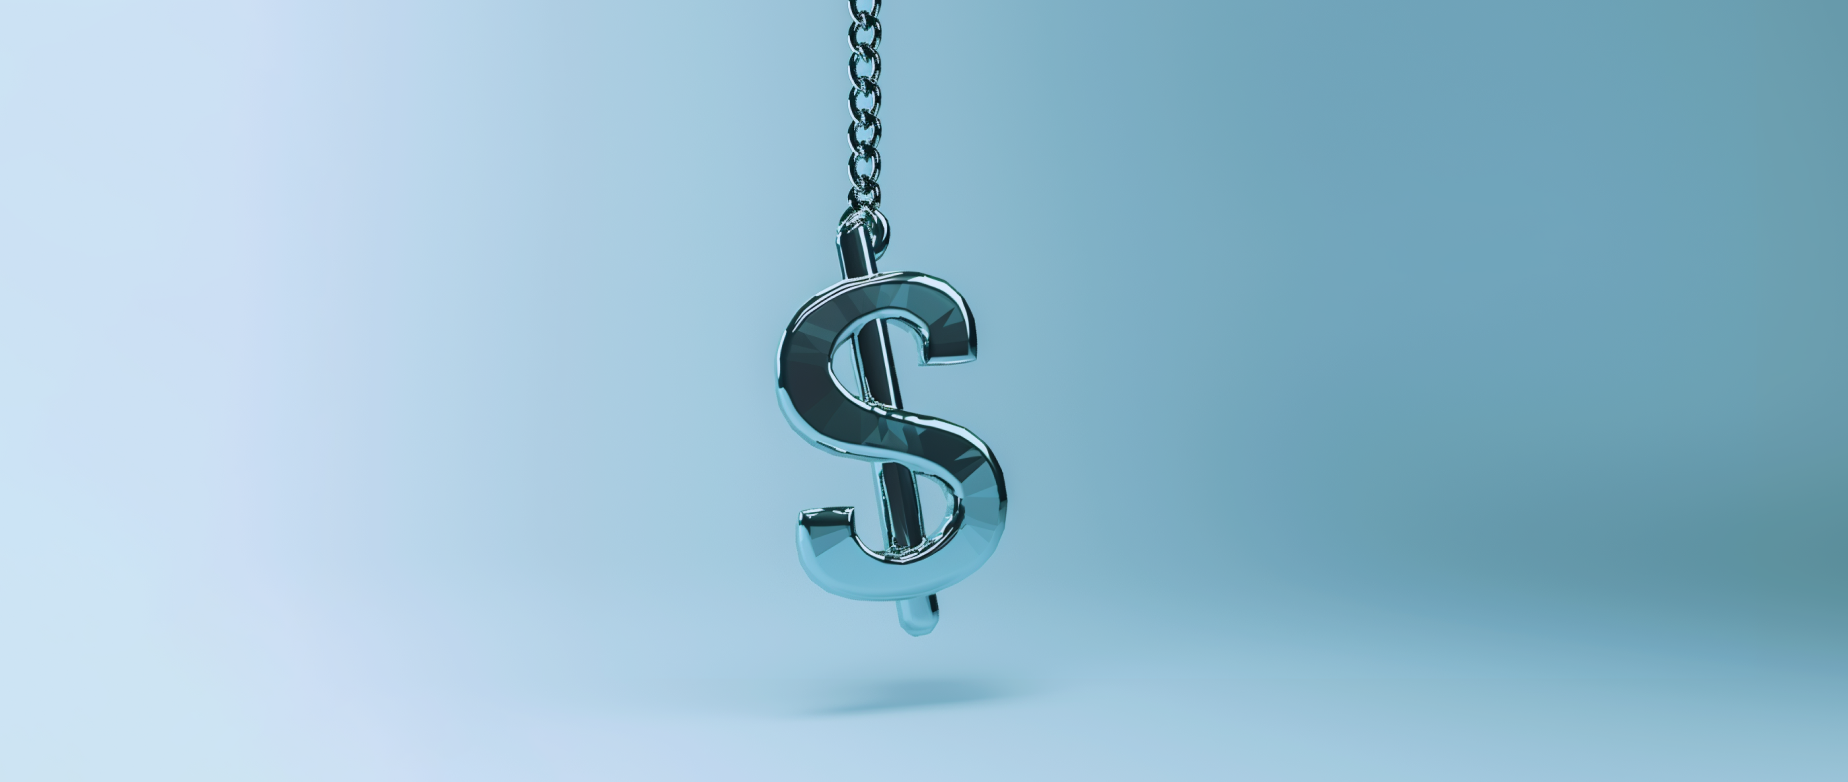 An anchor in the shape of a US dollar sign on a light blue background.